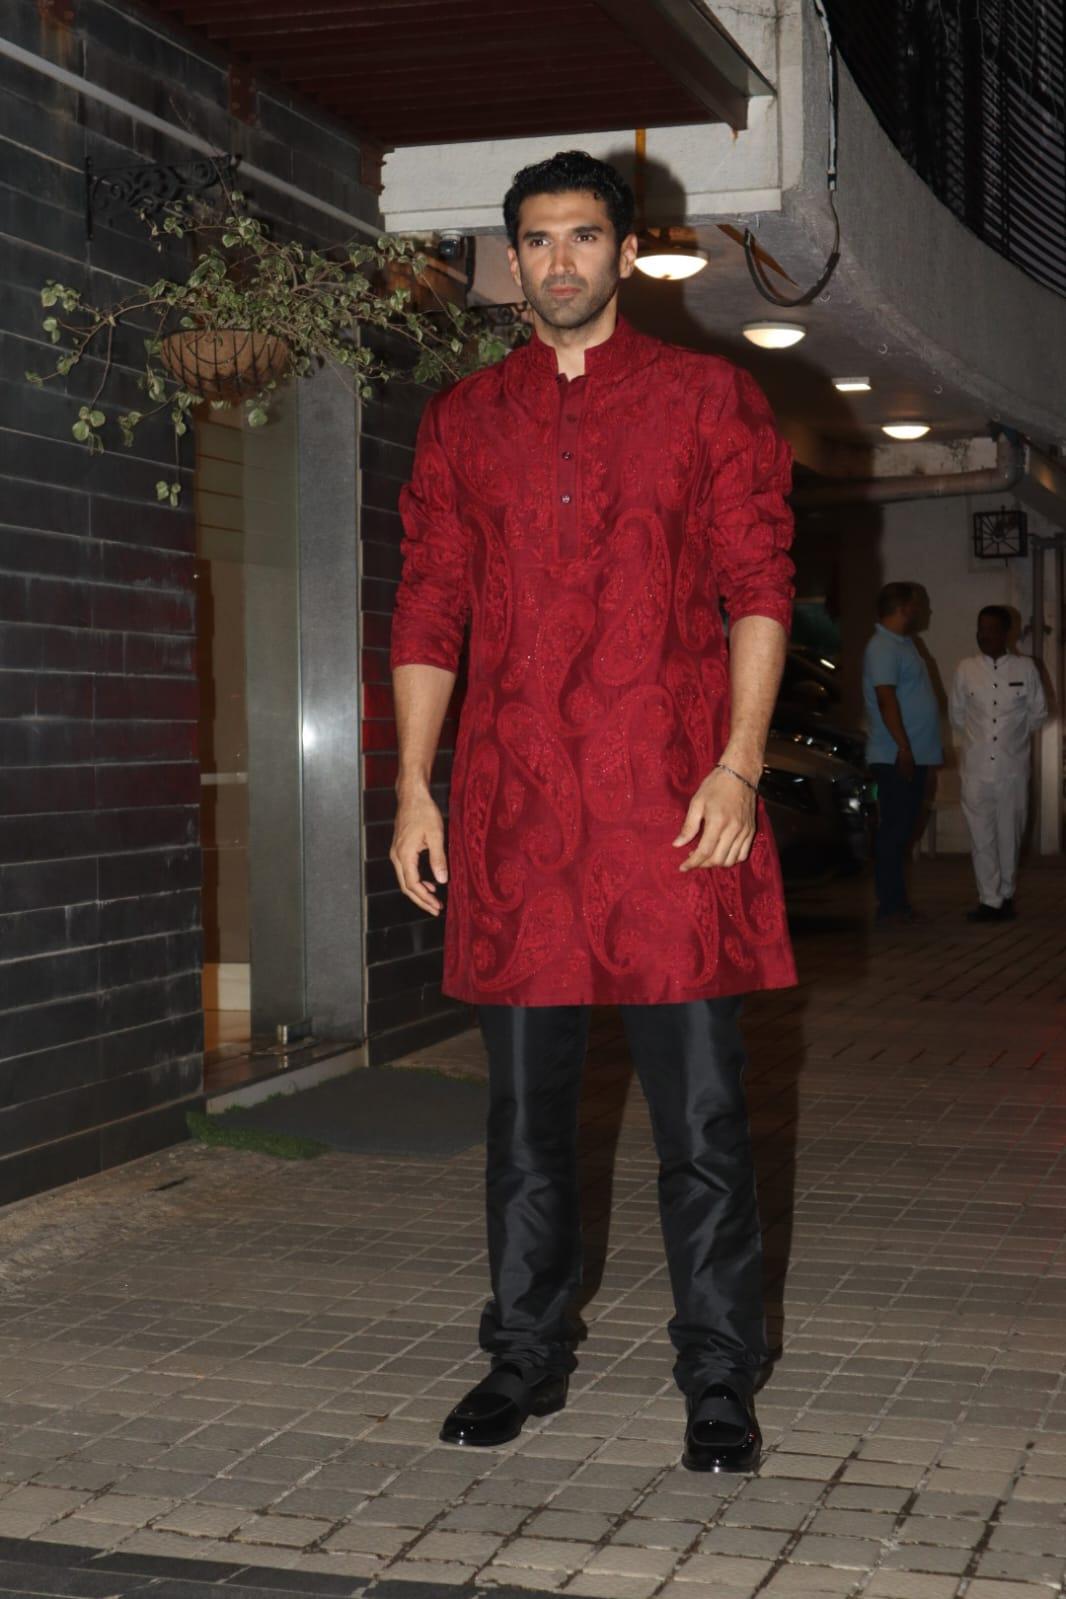 Aditya Roy Kapur, Ananya Panday's rumoured boyfriend arrived at the party as well